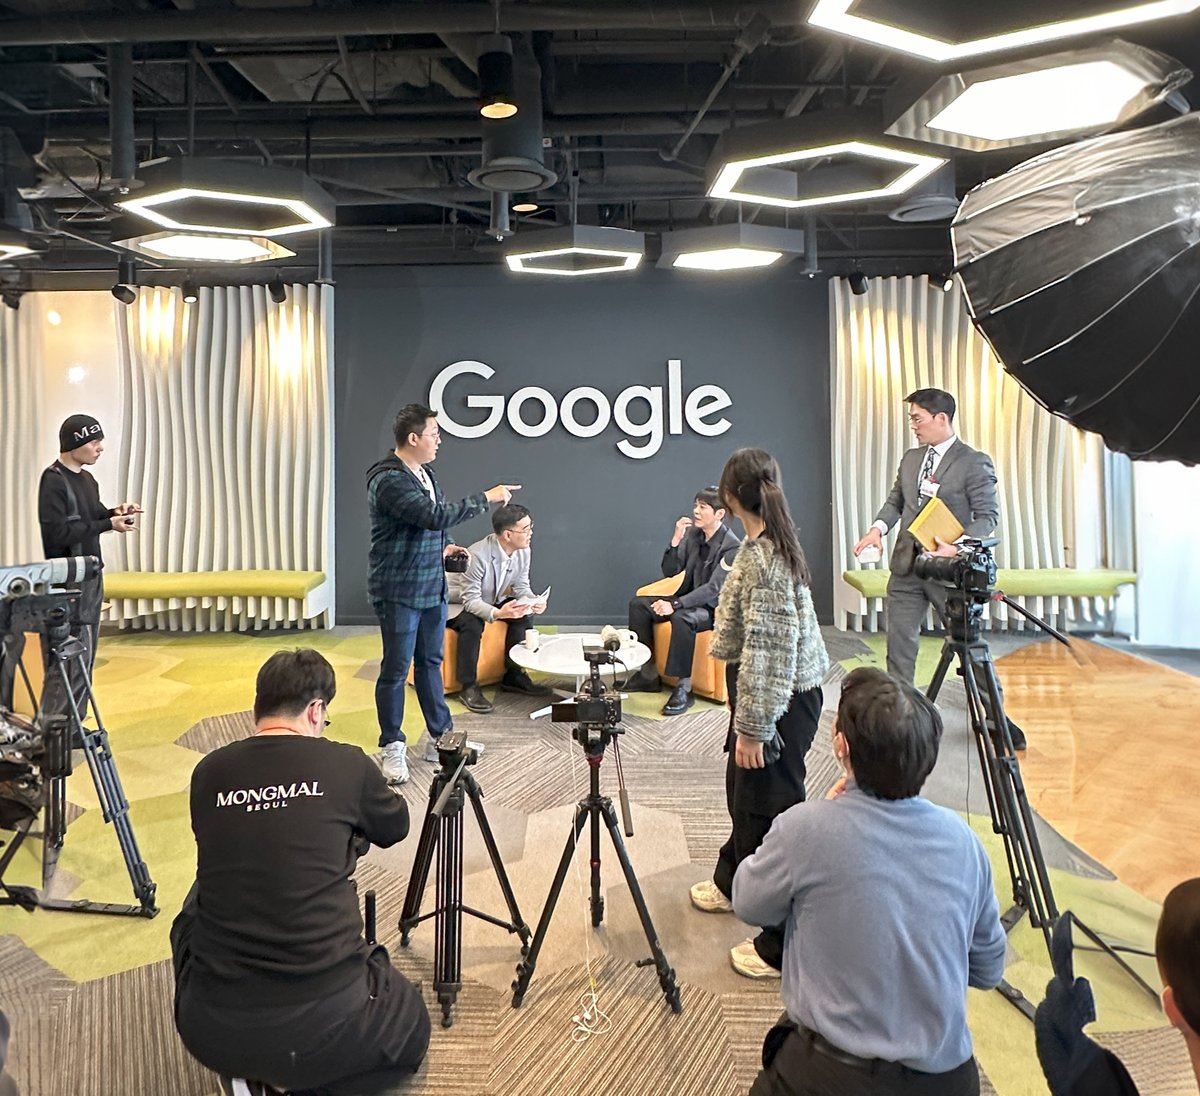 Our Ketchum Korea team recently helped support the 20th anniversary of #client @Google Korea, collaborating to organize a special interview with Lee Sae Dol, a renowned Go player! As the only human to beat the AI Go player, AlphaGo, Lee discussed the trajectory of AI technology!